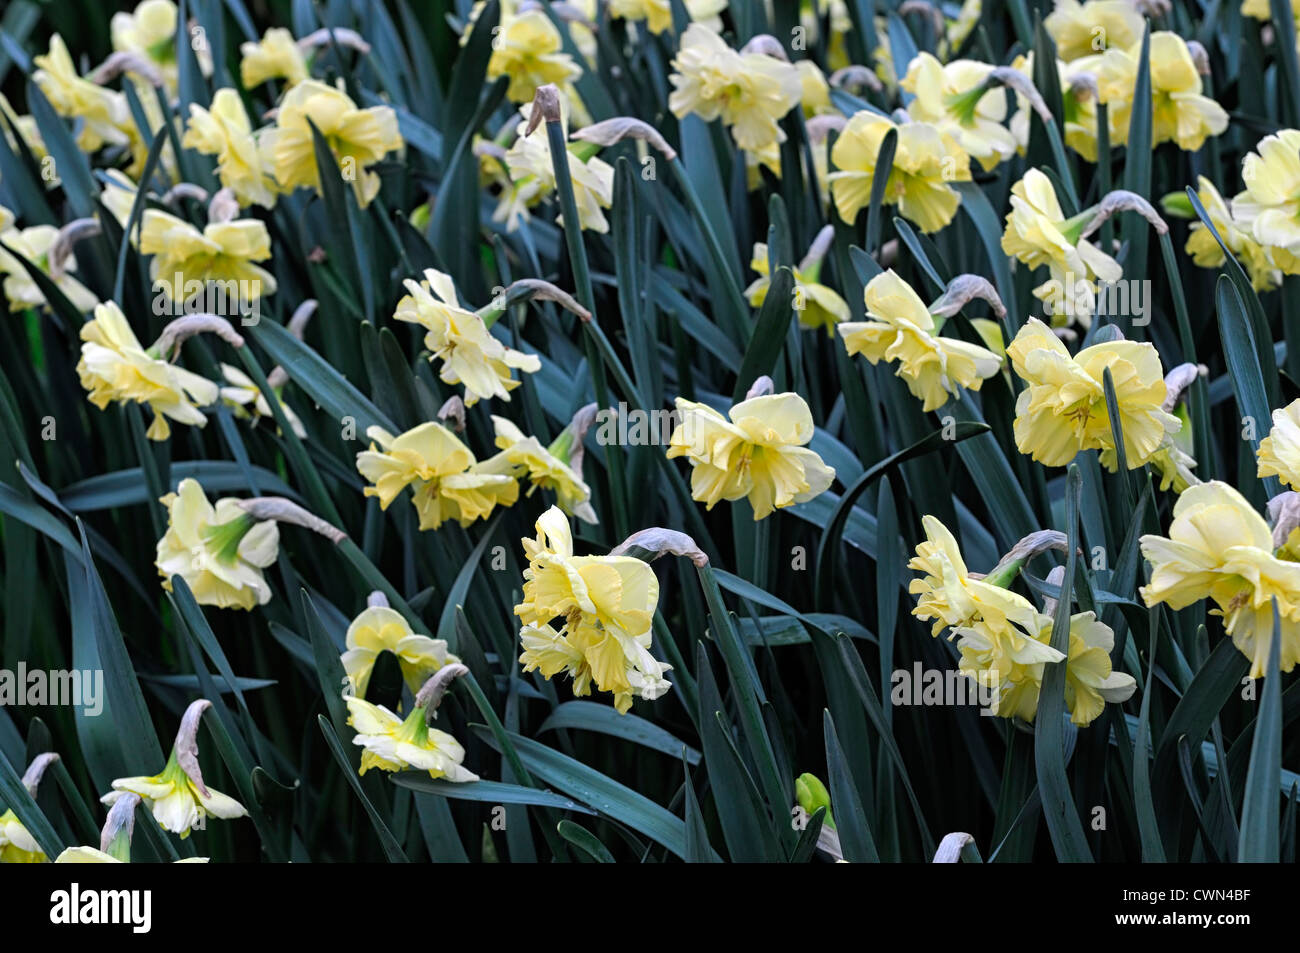 narcissus indian summer pale yellow daffodil flowers narcissi daffodils bulbs spring flowering bloom blossom Stock Photo